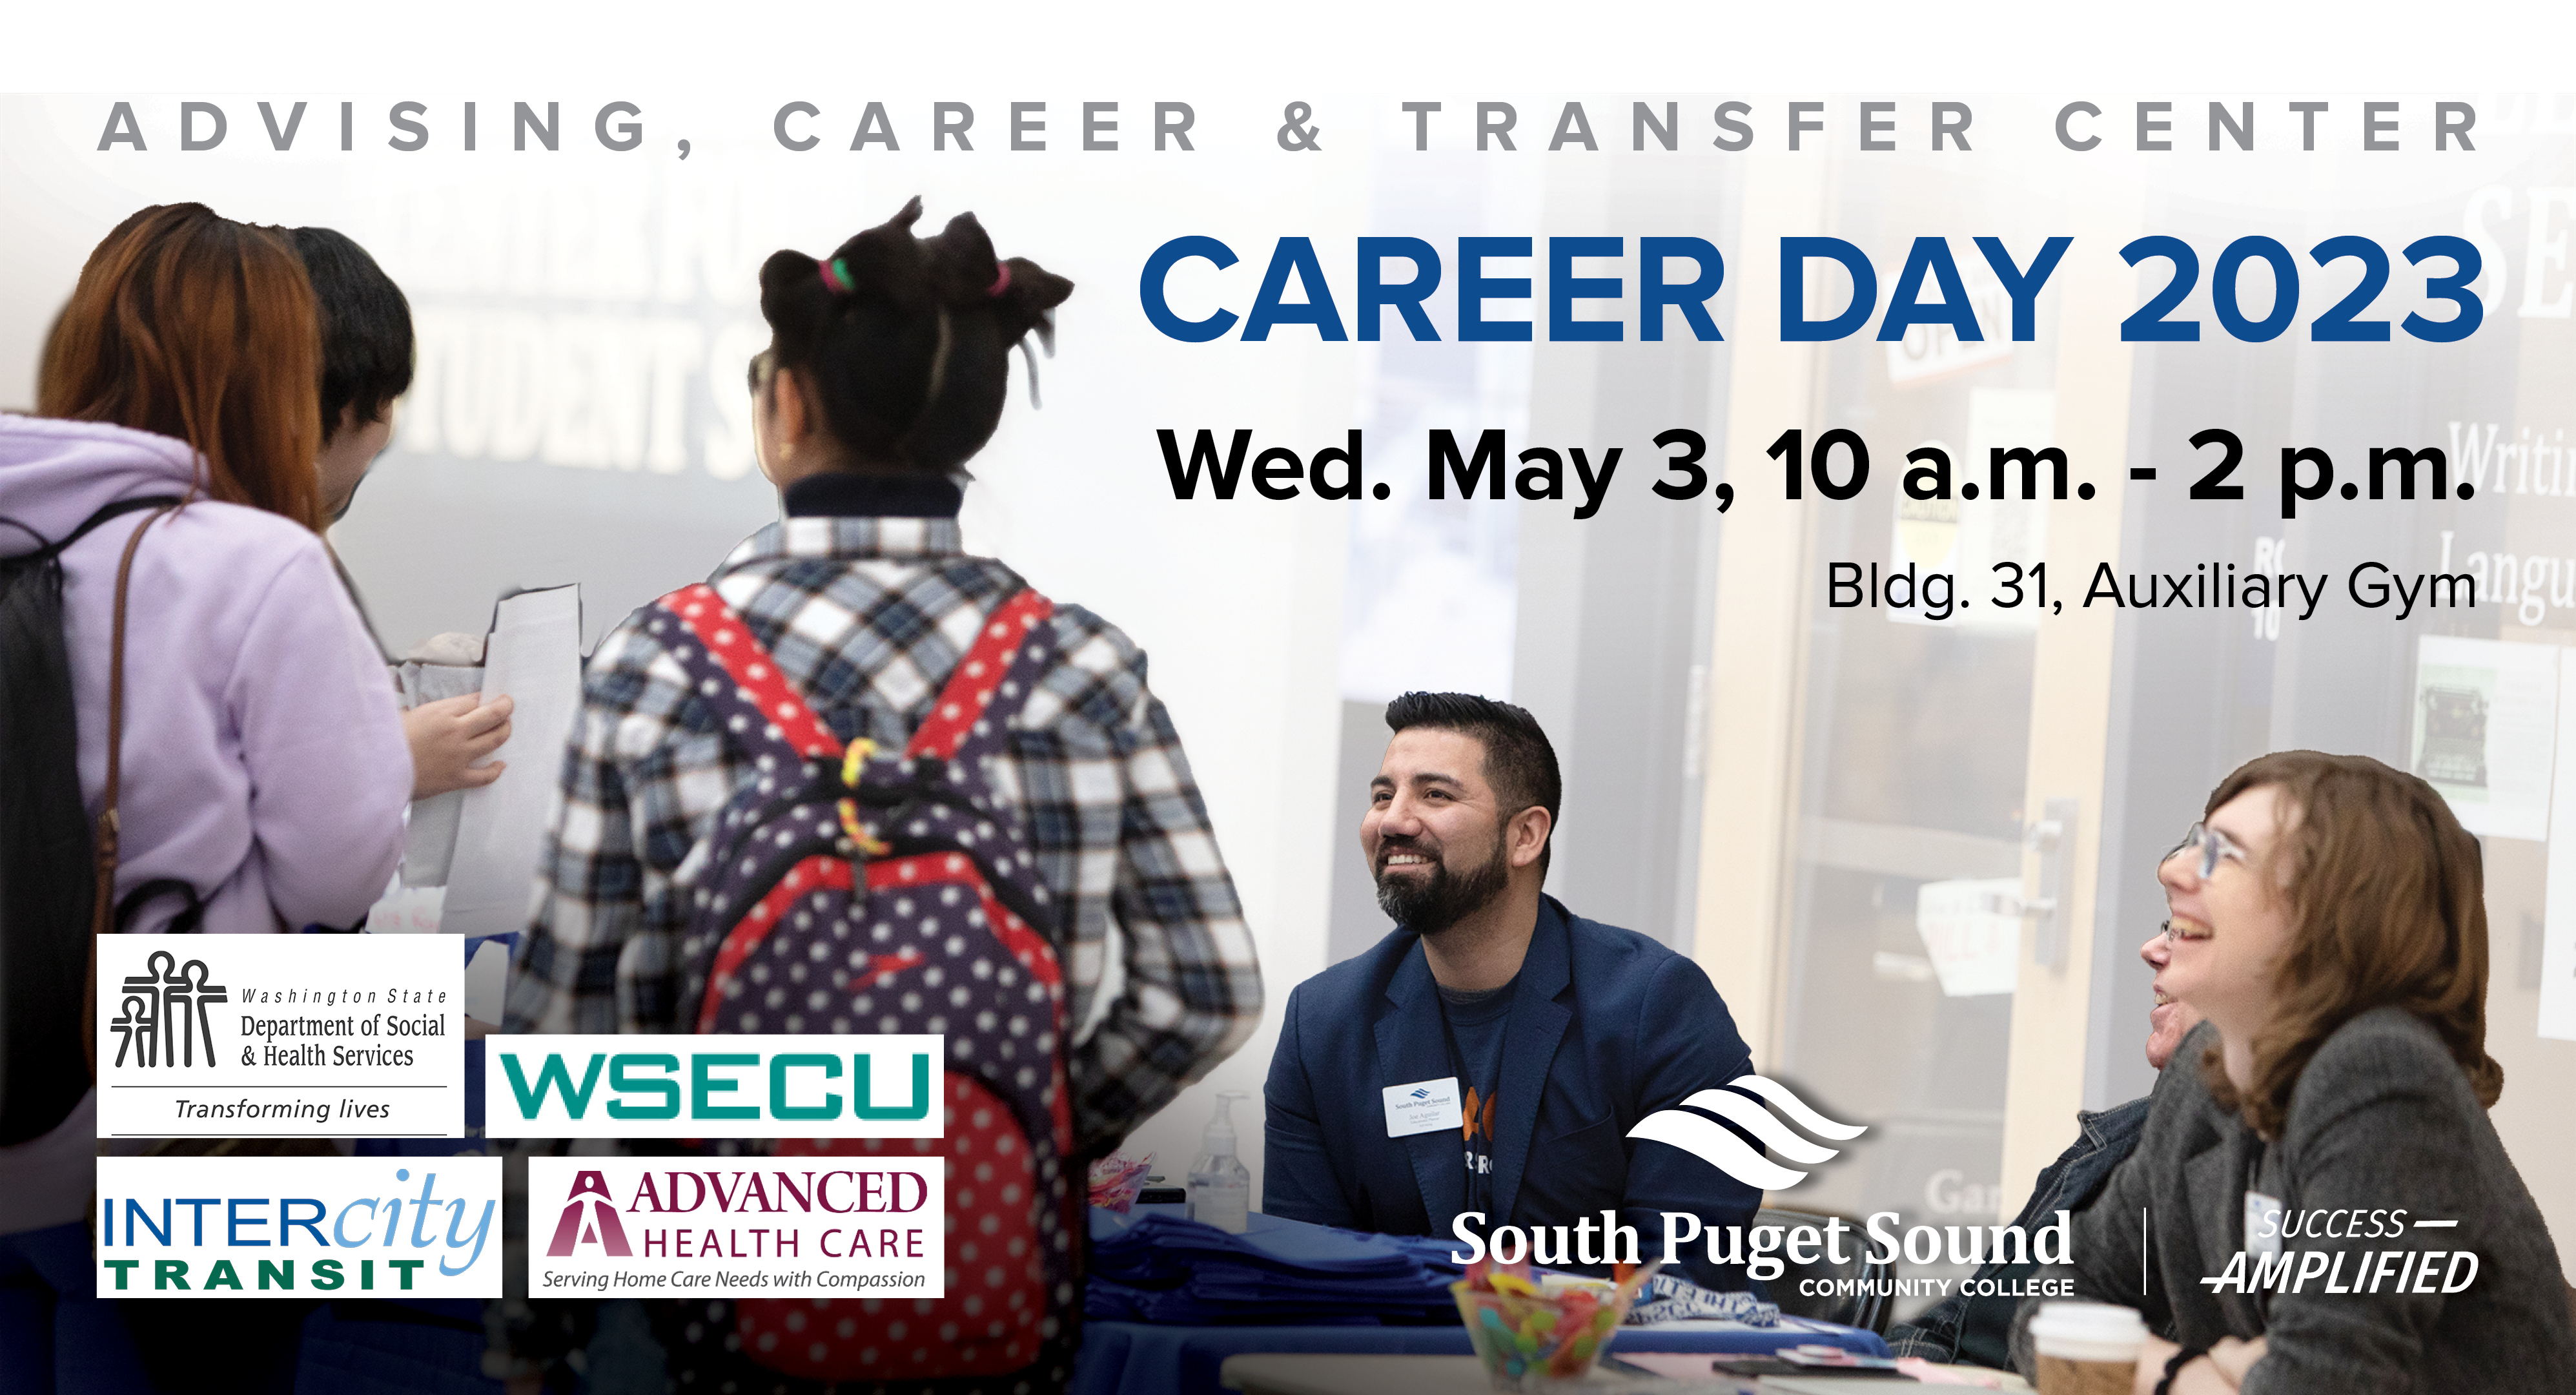 Advising, Career & Transfer Center Career Day 2023 on Wednesday, May 3 from 10 a.m. to 2 p.m. in Building 31's auxiliary gym